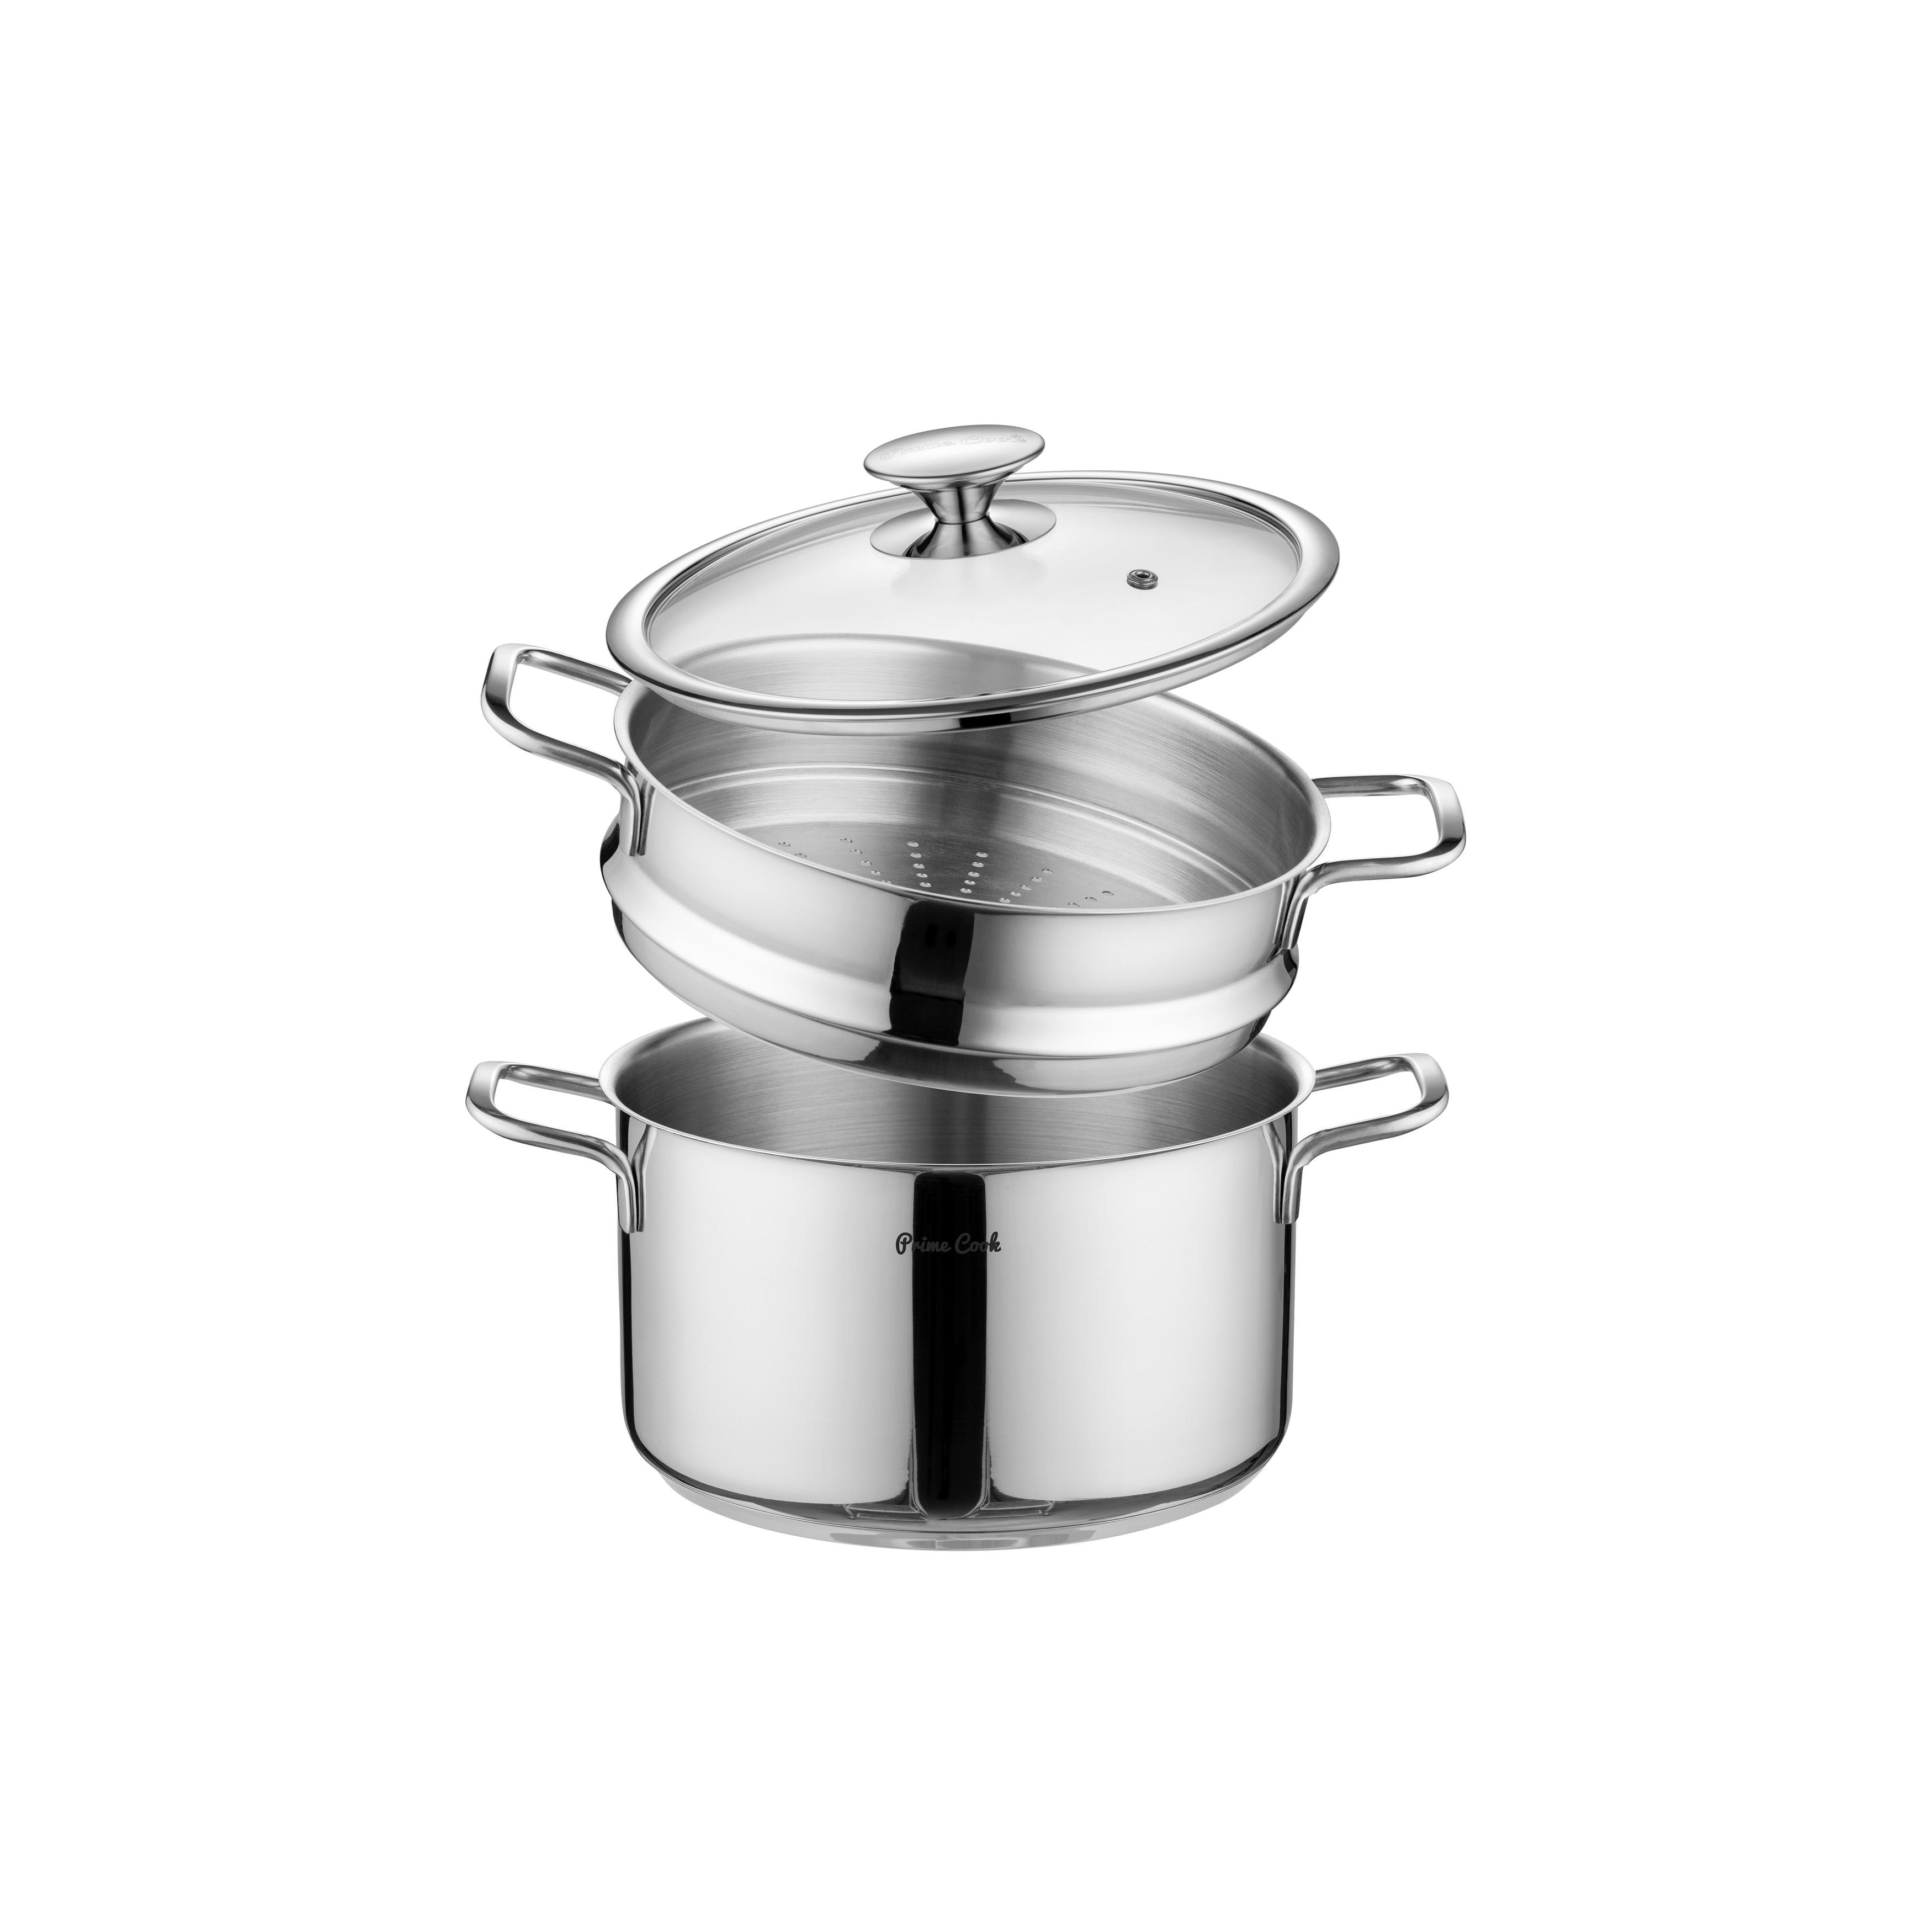 Nutrichef Heavy Duty 19 Quart Stainless Steel Soup Stock Pot with Lid